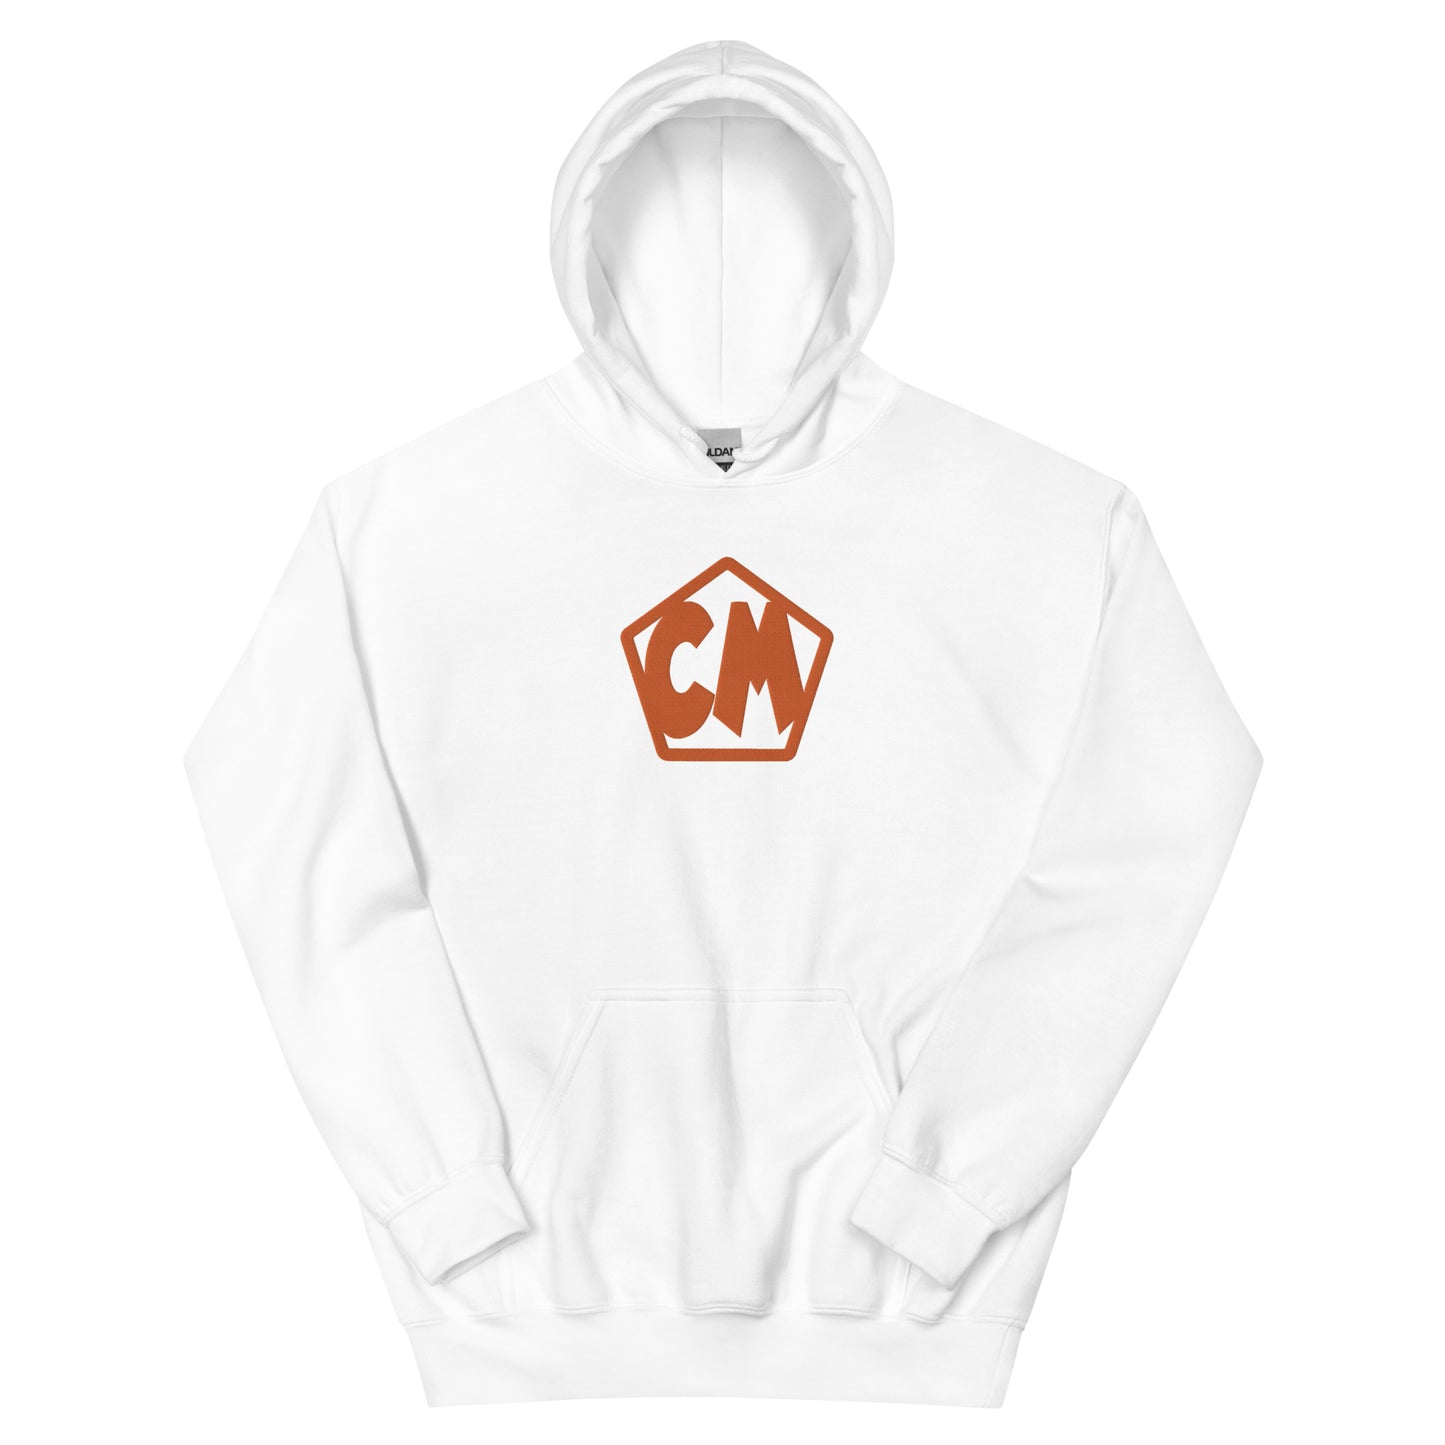 Curtis Muhammad - Racing Hoodie embroidered